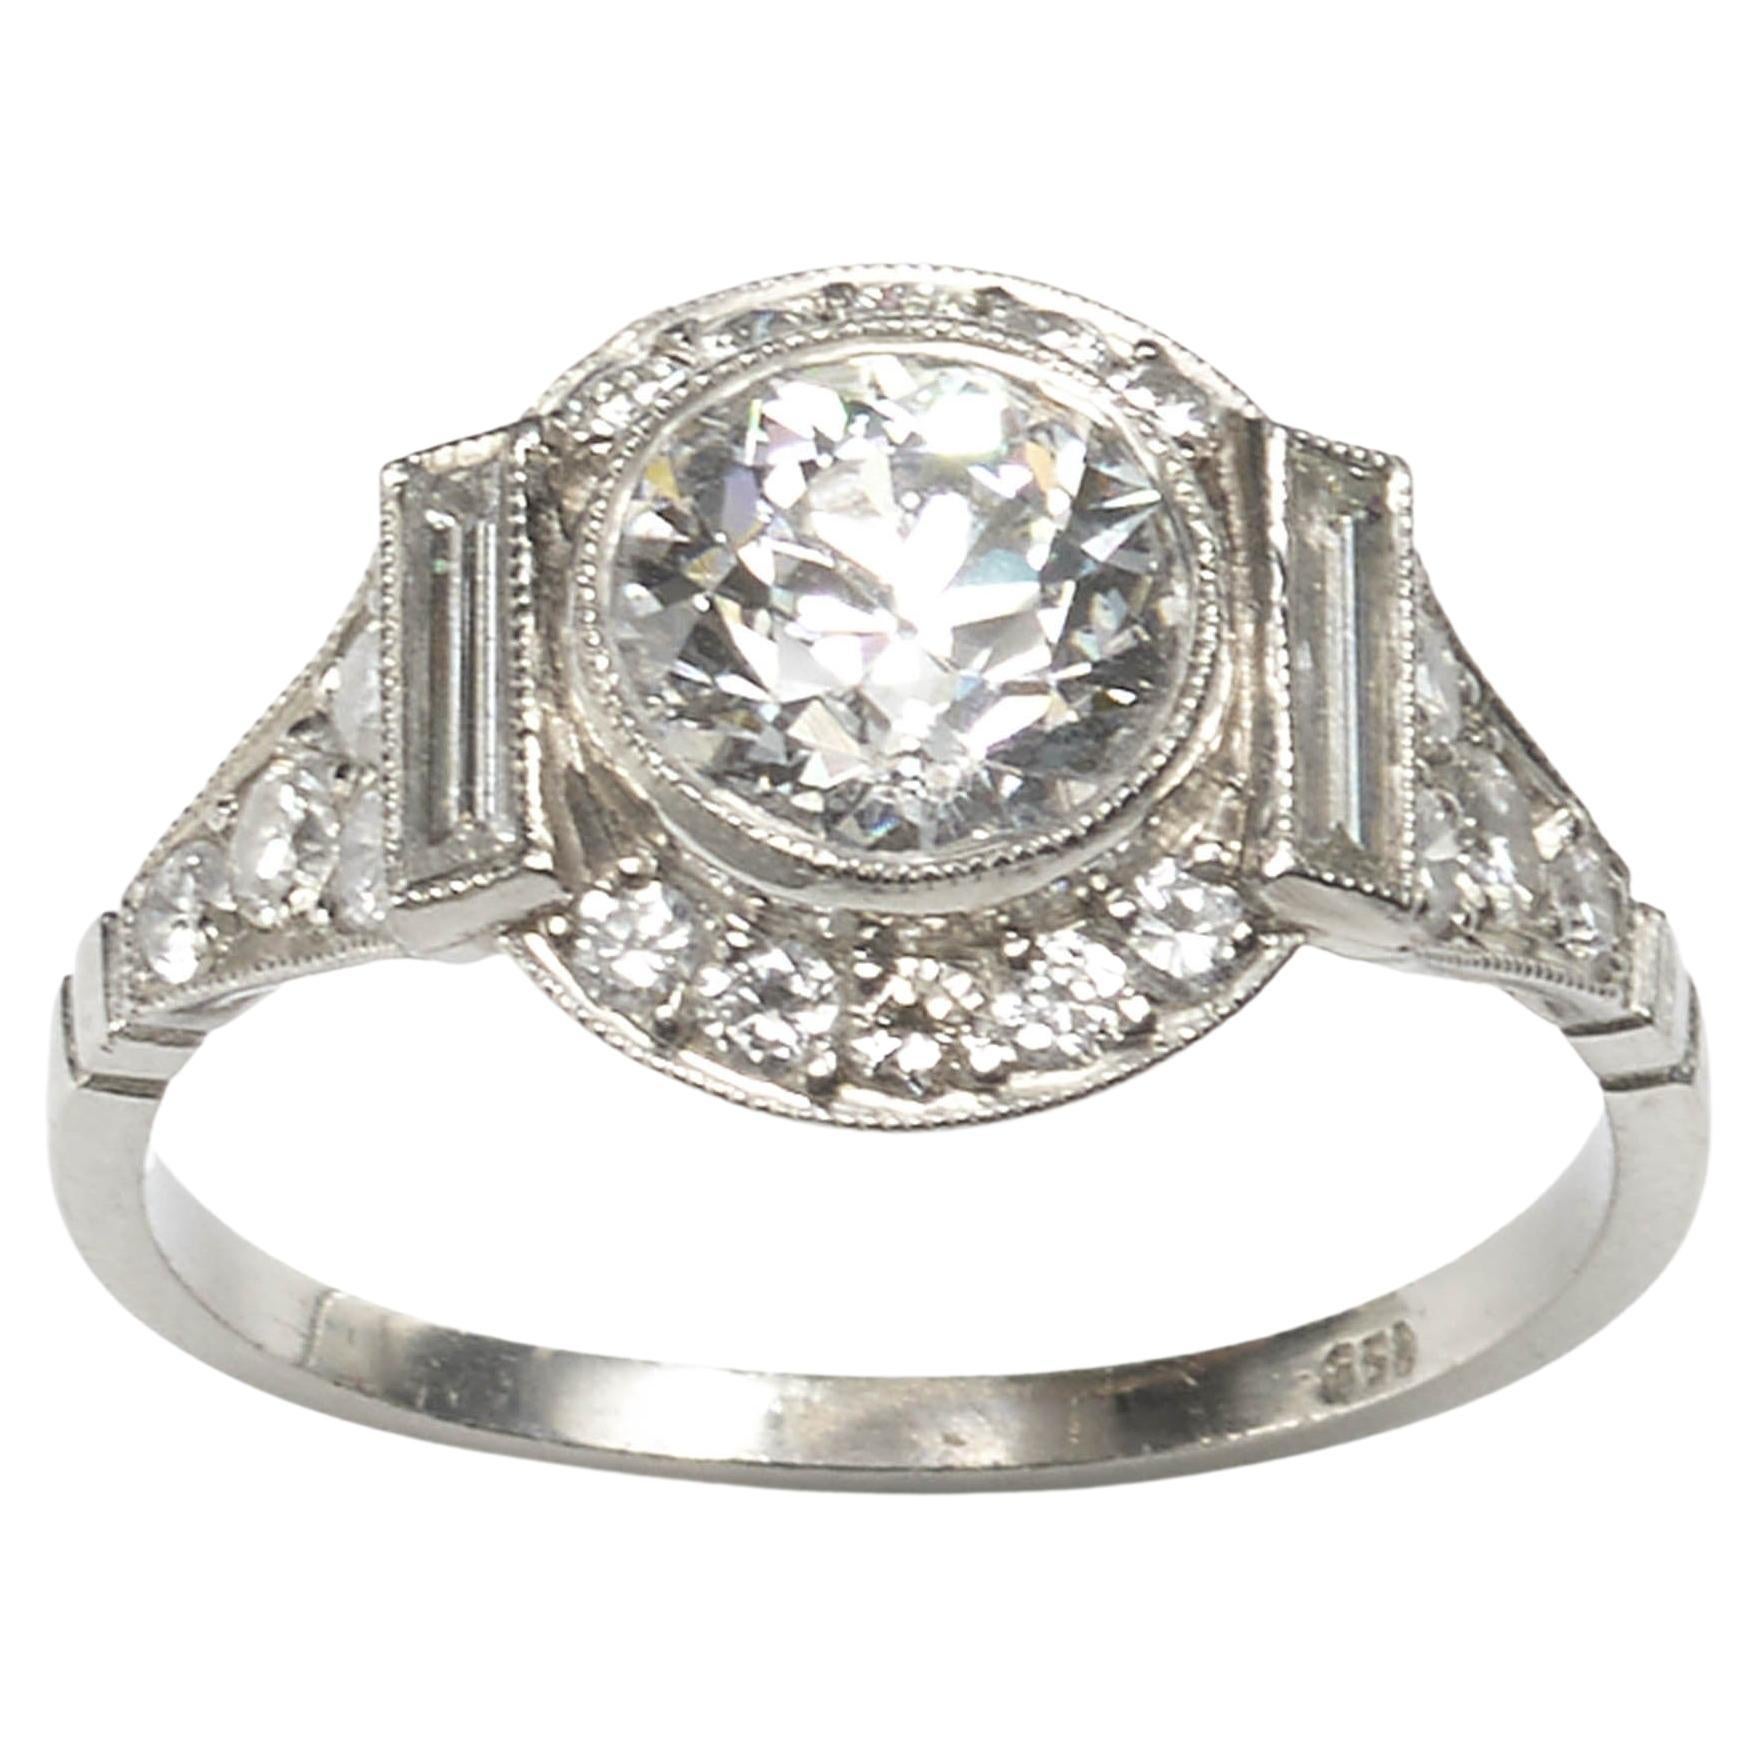 Modern Art Deco Style Diamond and Platinum Cluster Ring, 1.48ct